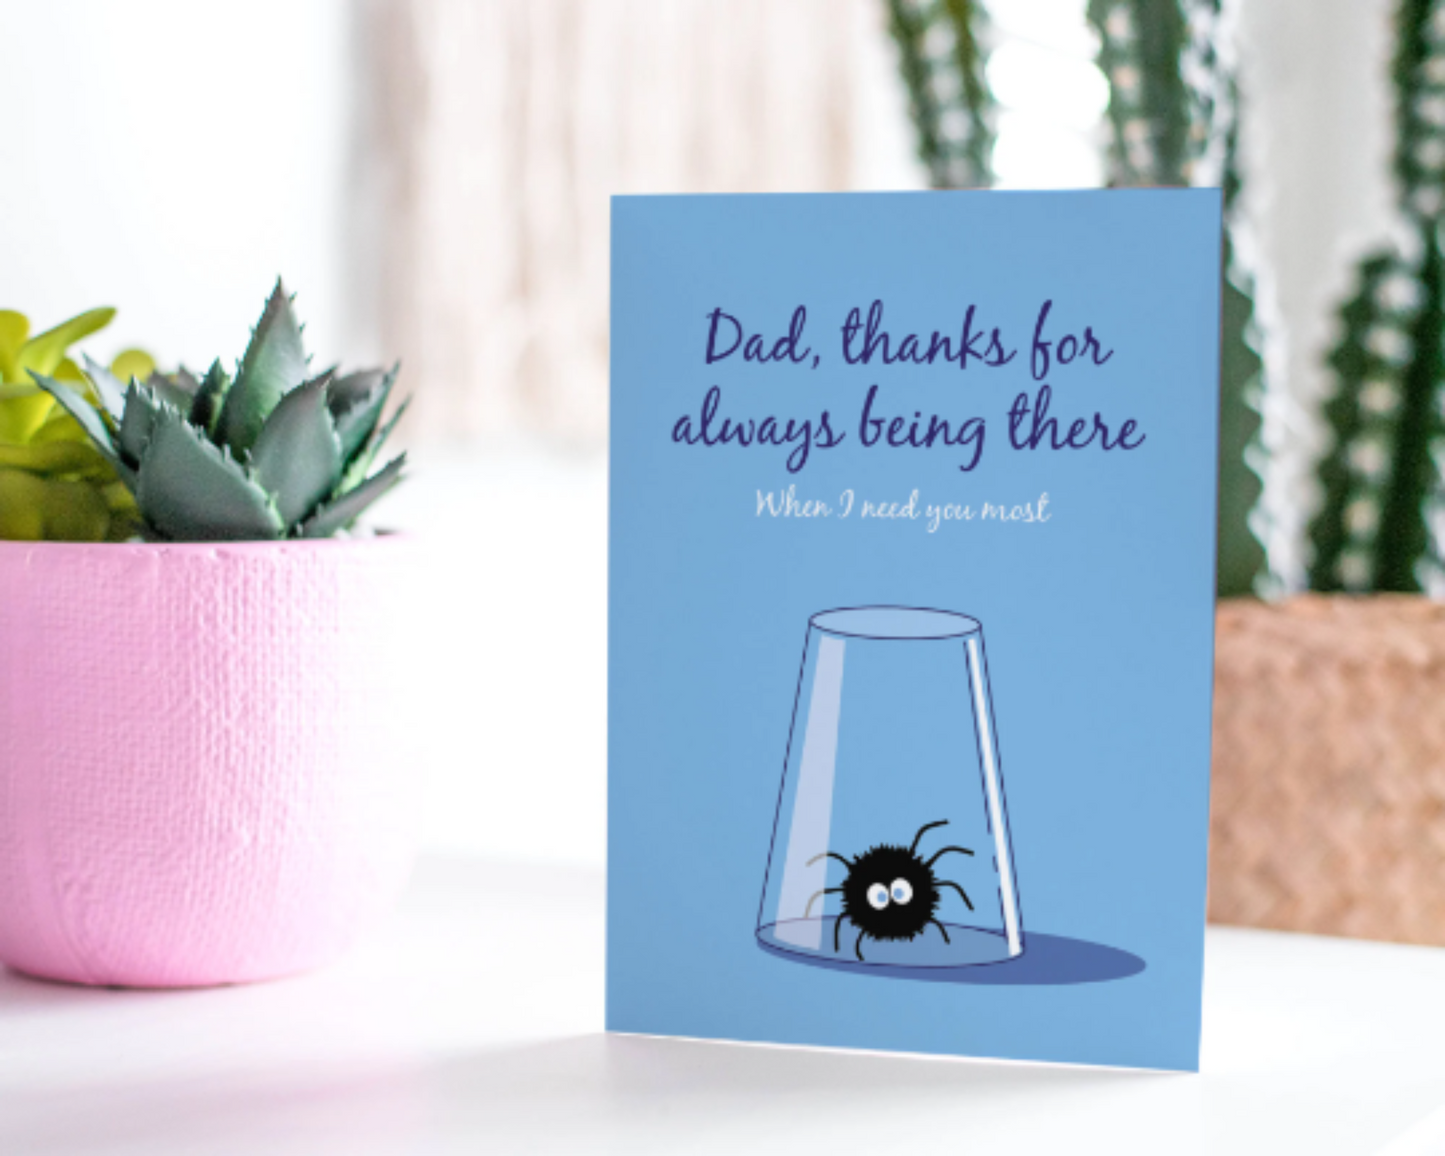 Thanks For Always Being There - Father's Day Card - Funny Card For Dad